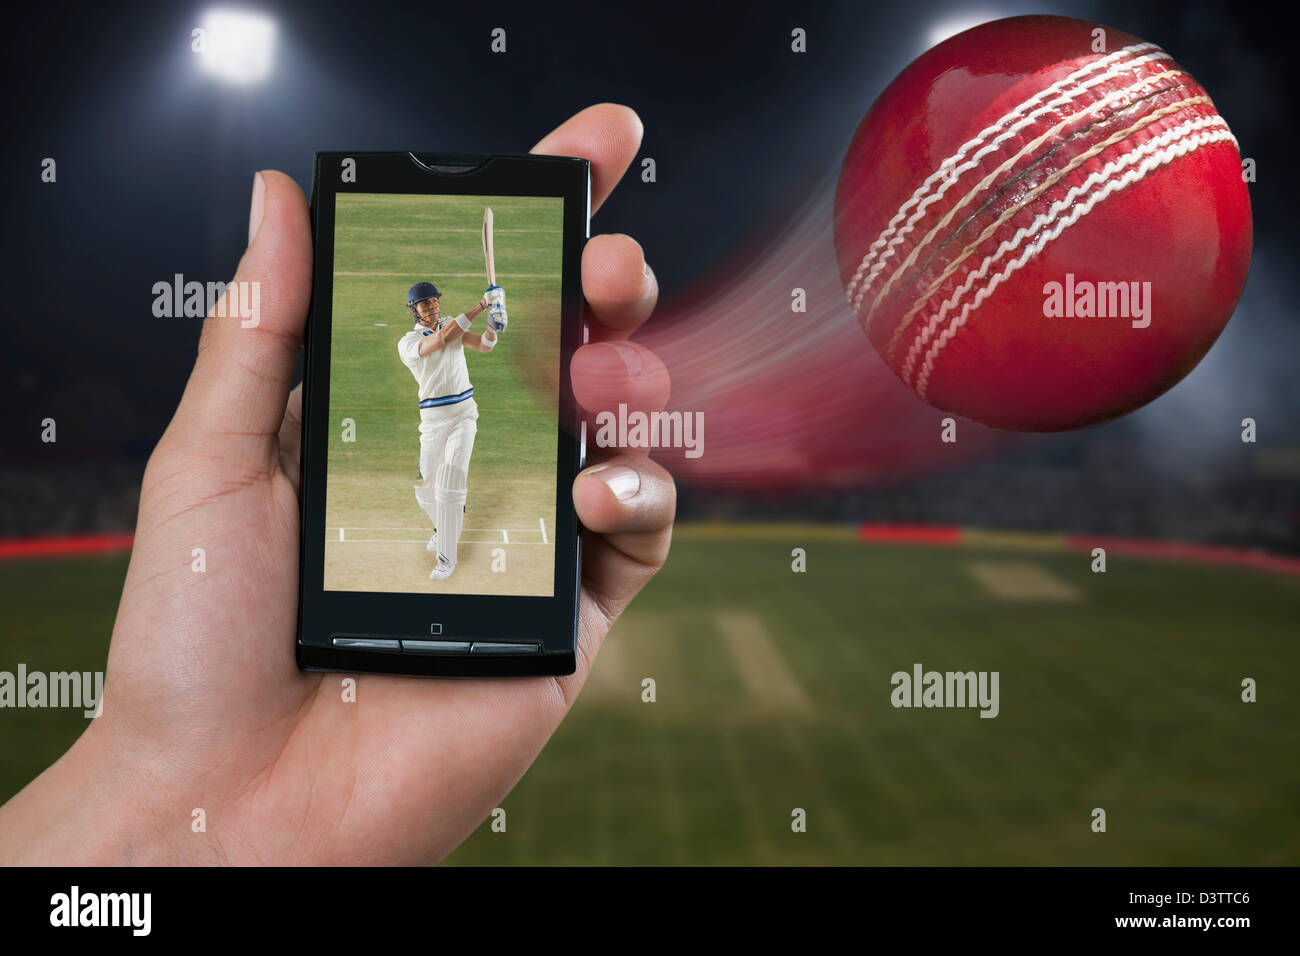 Man watching a cricket match on a mobile phone Stock Photo